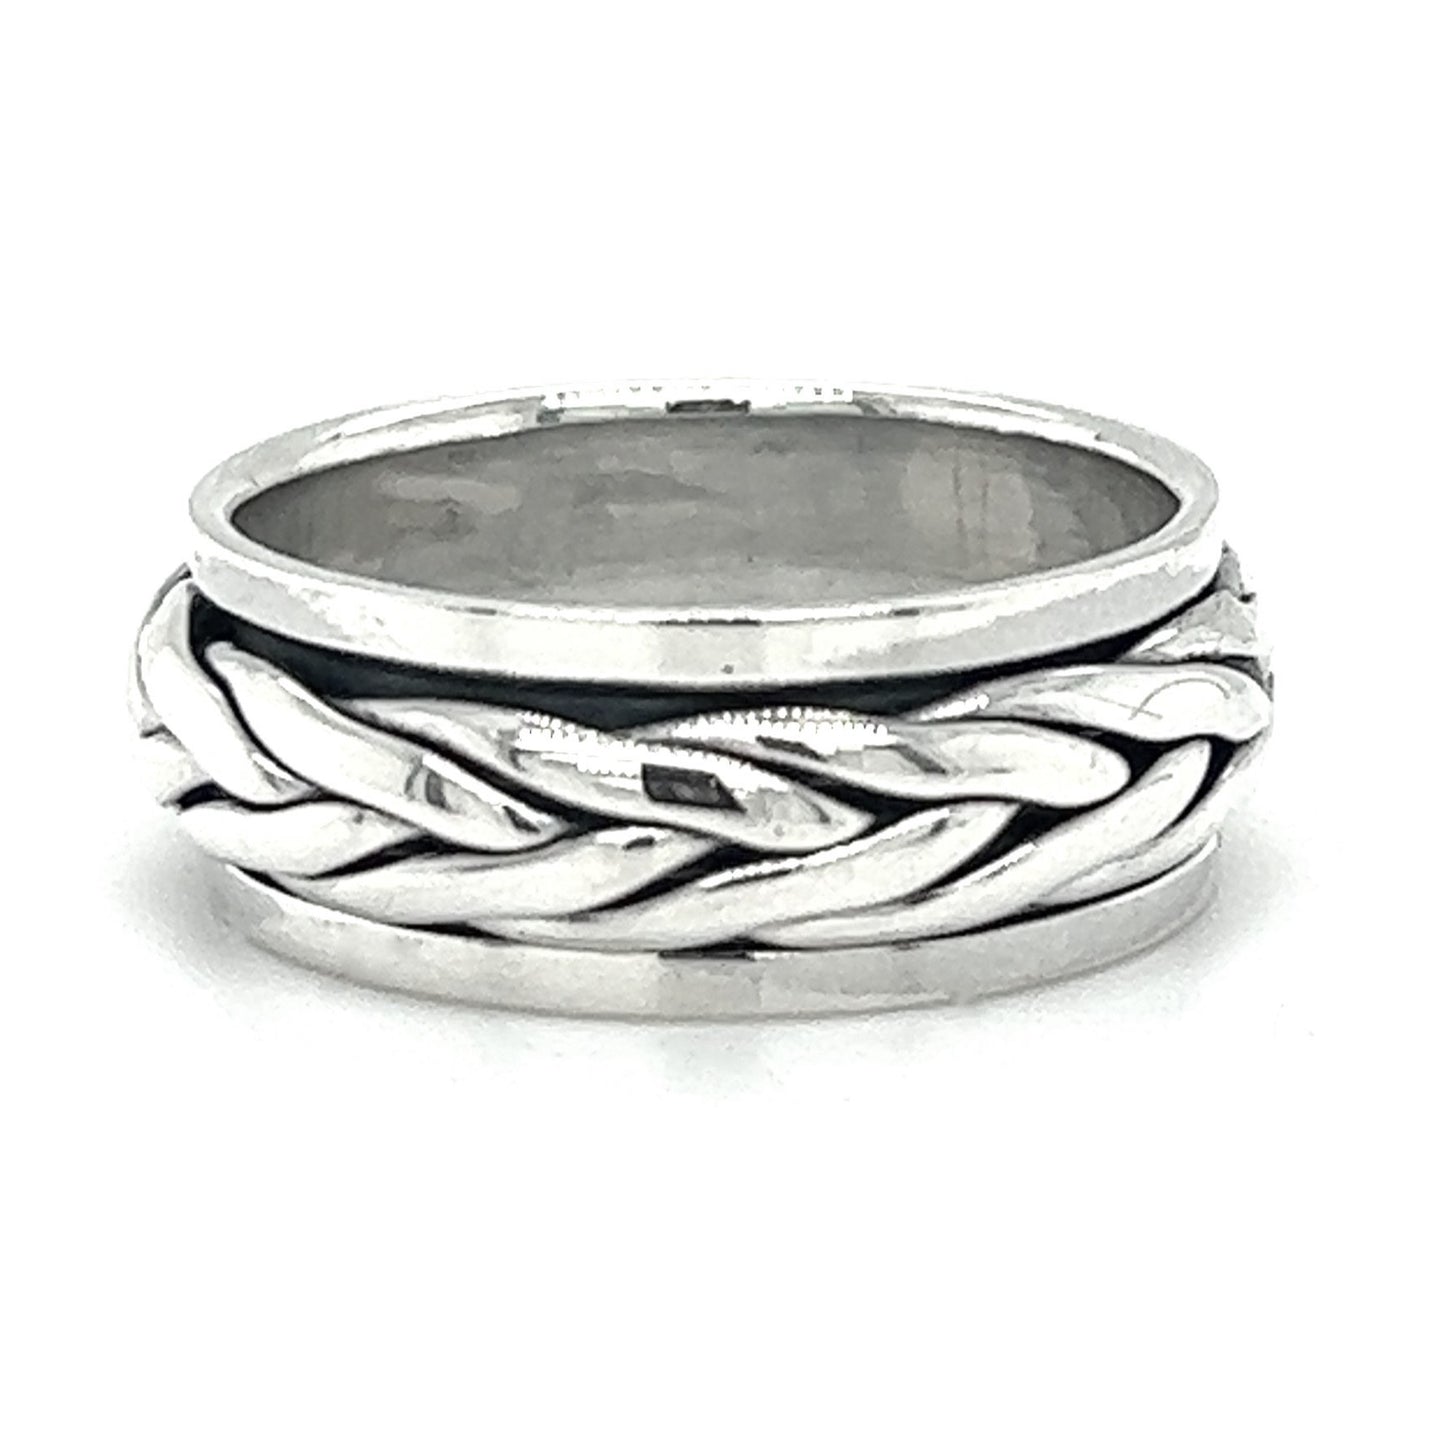 A contemporary silver Heavy Woven Rope Spinner Band with a handsome braided design.